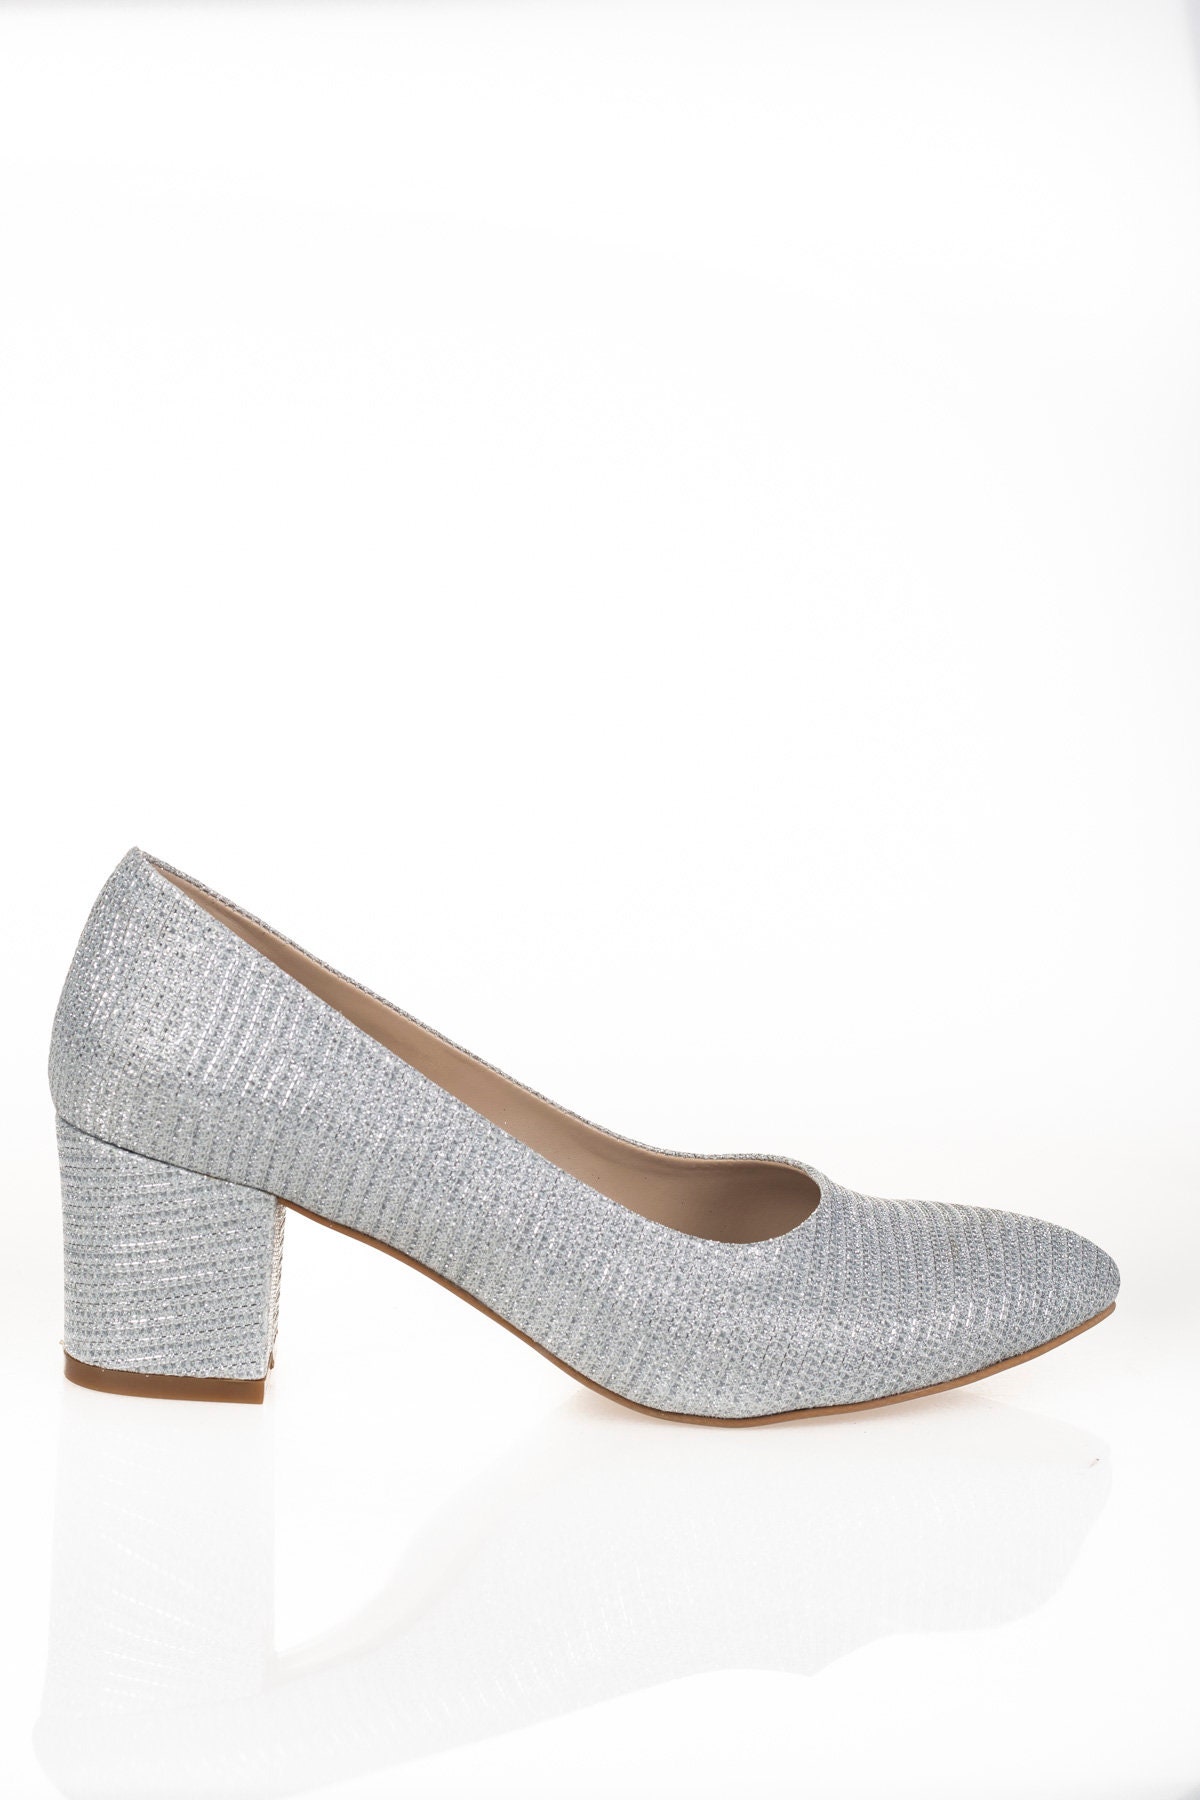 Women's Low-cut Chunky Heel Shoes, Silver Sequin Mary Jane High Heels |  SHEIN